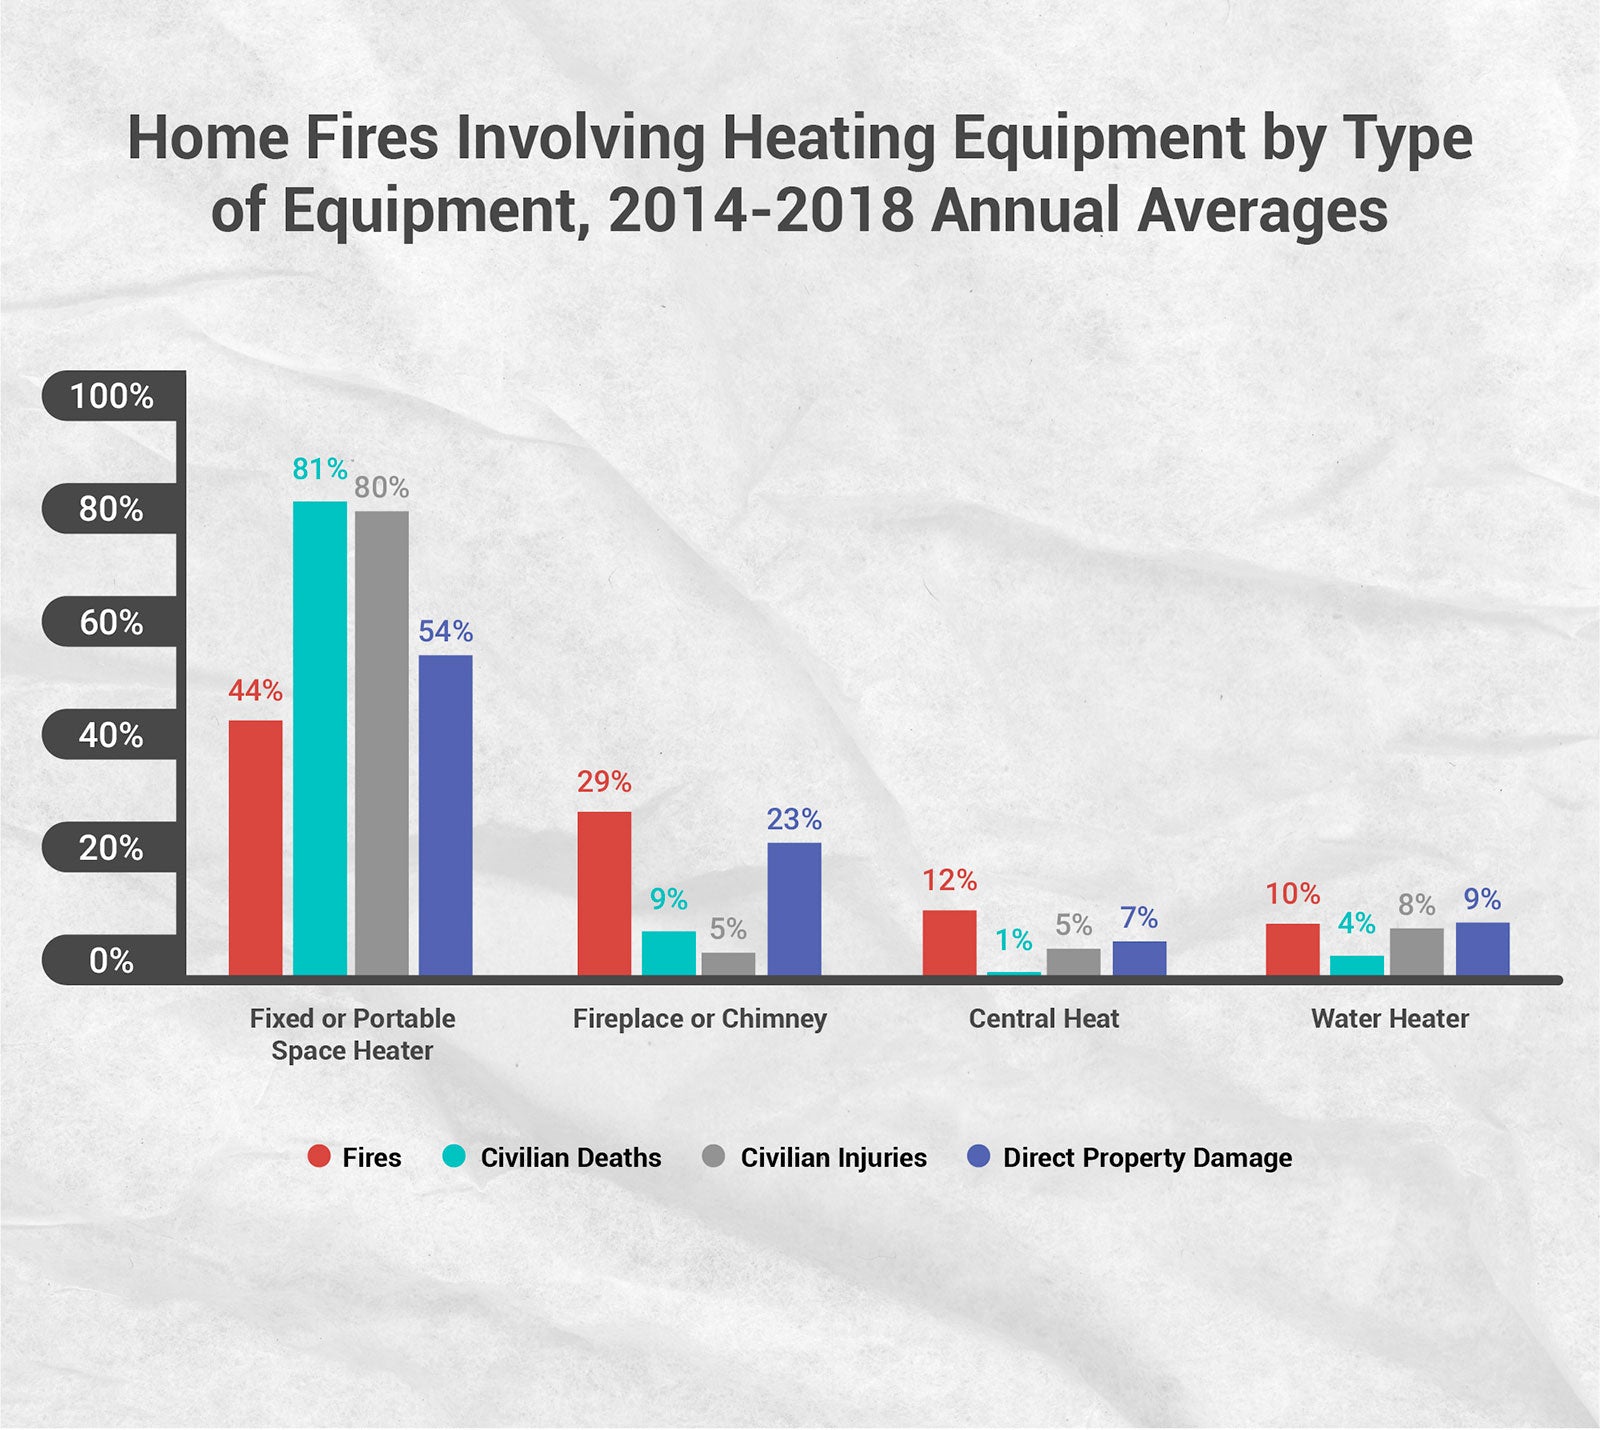 Chart of Home Fires Involving Heating Equipment by Type
of Equipment, 2014-2018 Annual Averages 